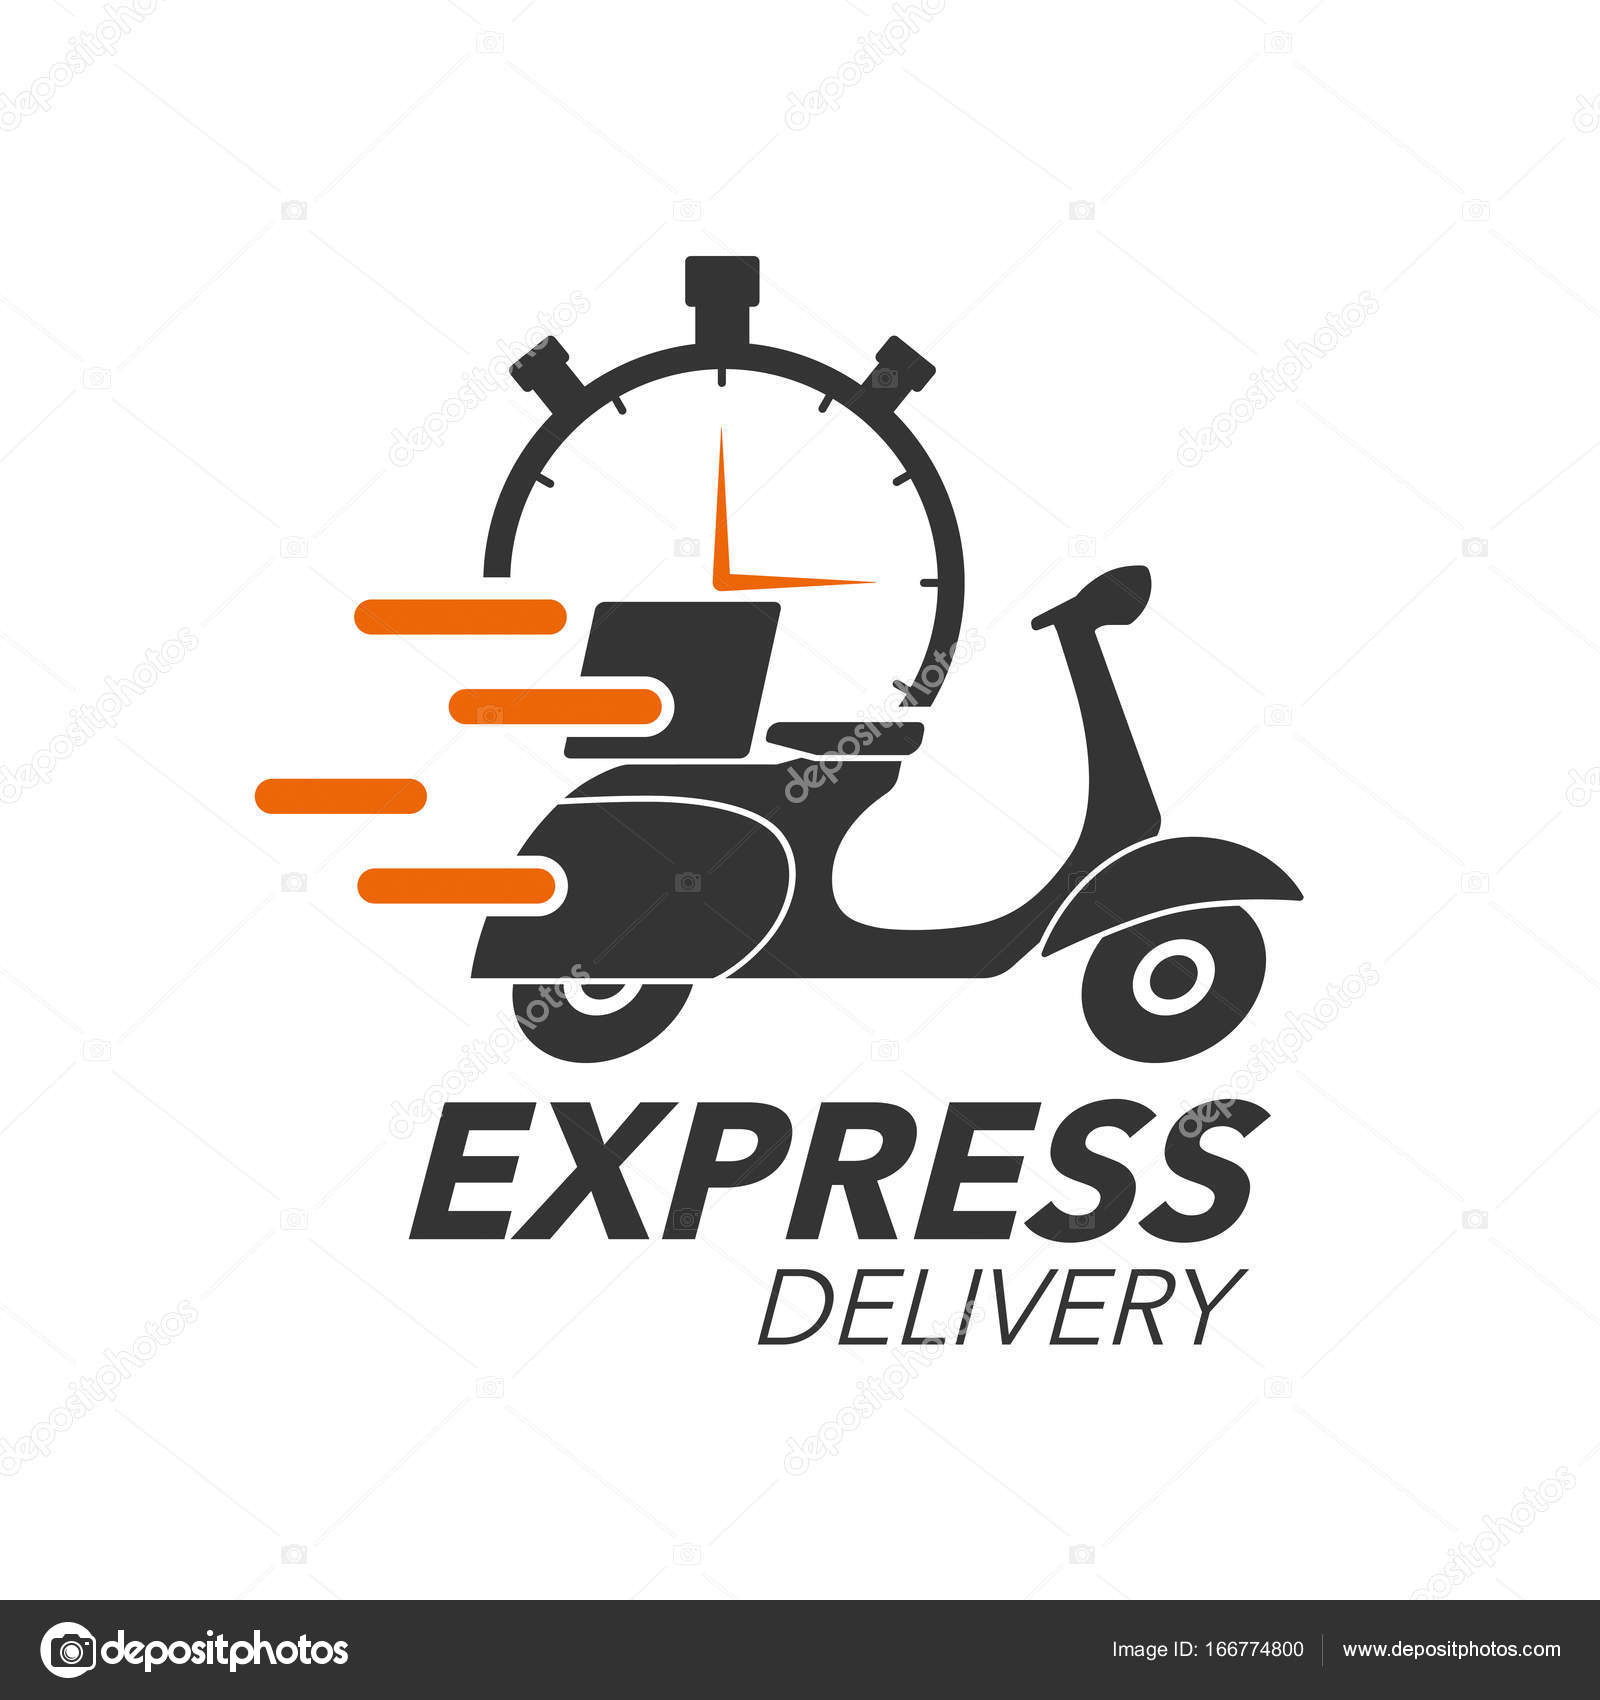 Express delivery icon concept. Scooter motorcycle with stop watc Stock  Vector by ©koson.photo.gmail.com 166774800